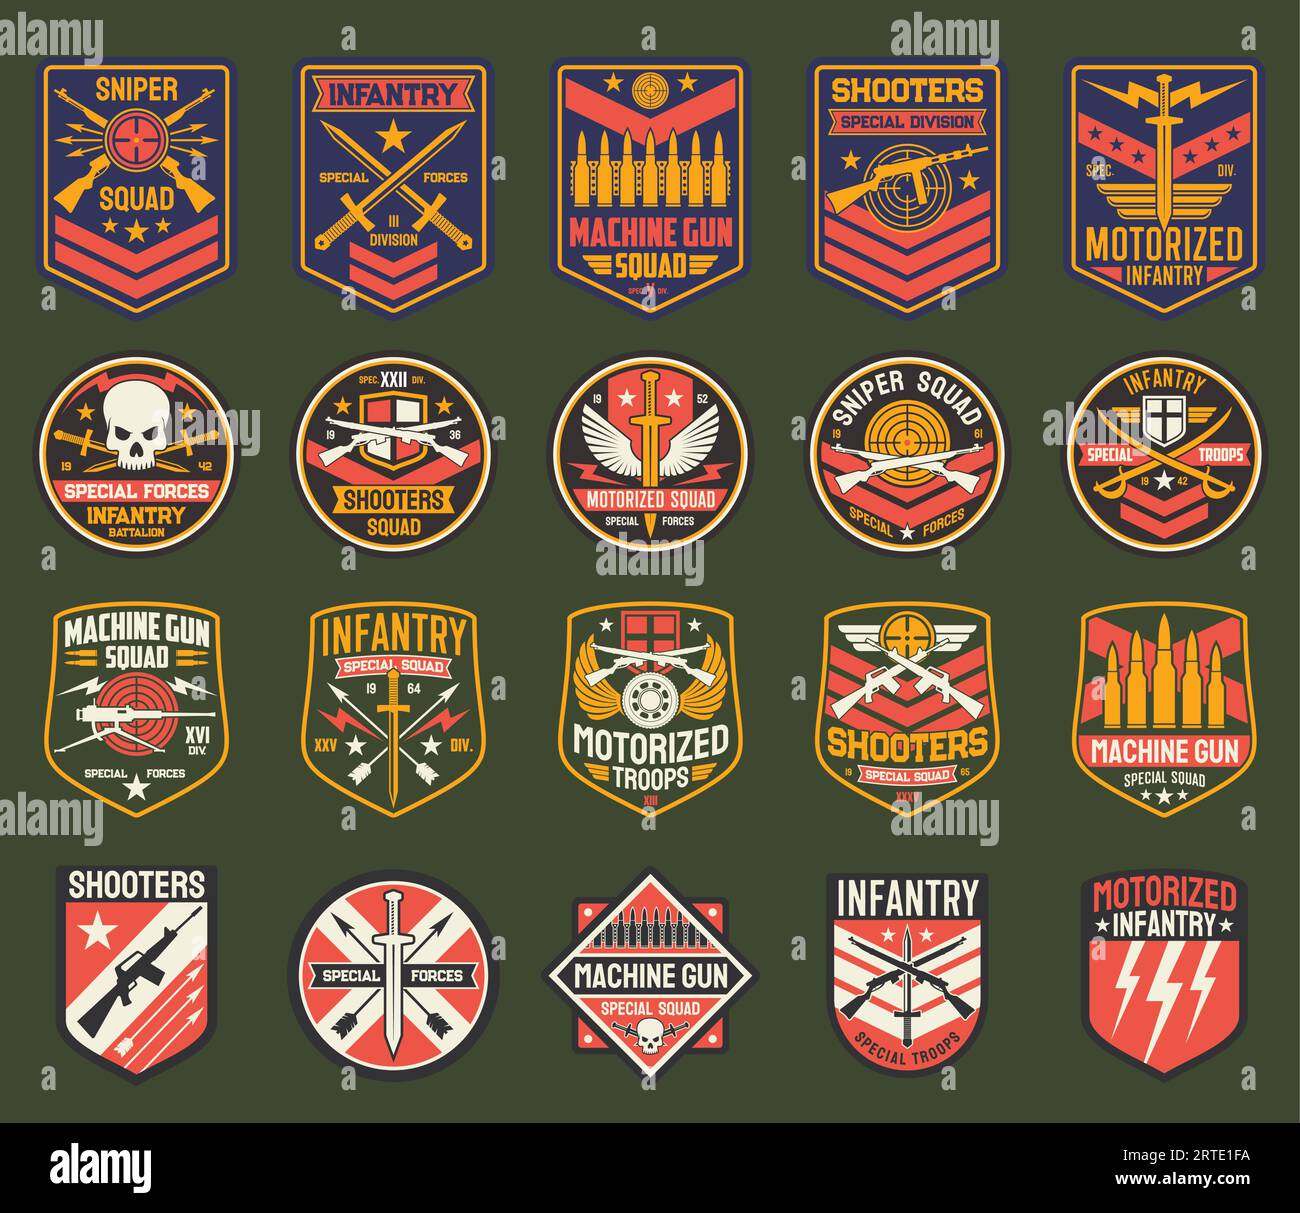 Military chevrons vector icons, army stripes for sniper squad, infantry special forces division. Machine gun, shooters, motorized battalion, isolated army insignia with weapon, skull or swords set Stock Vector